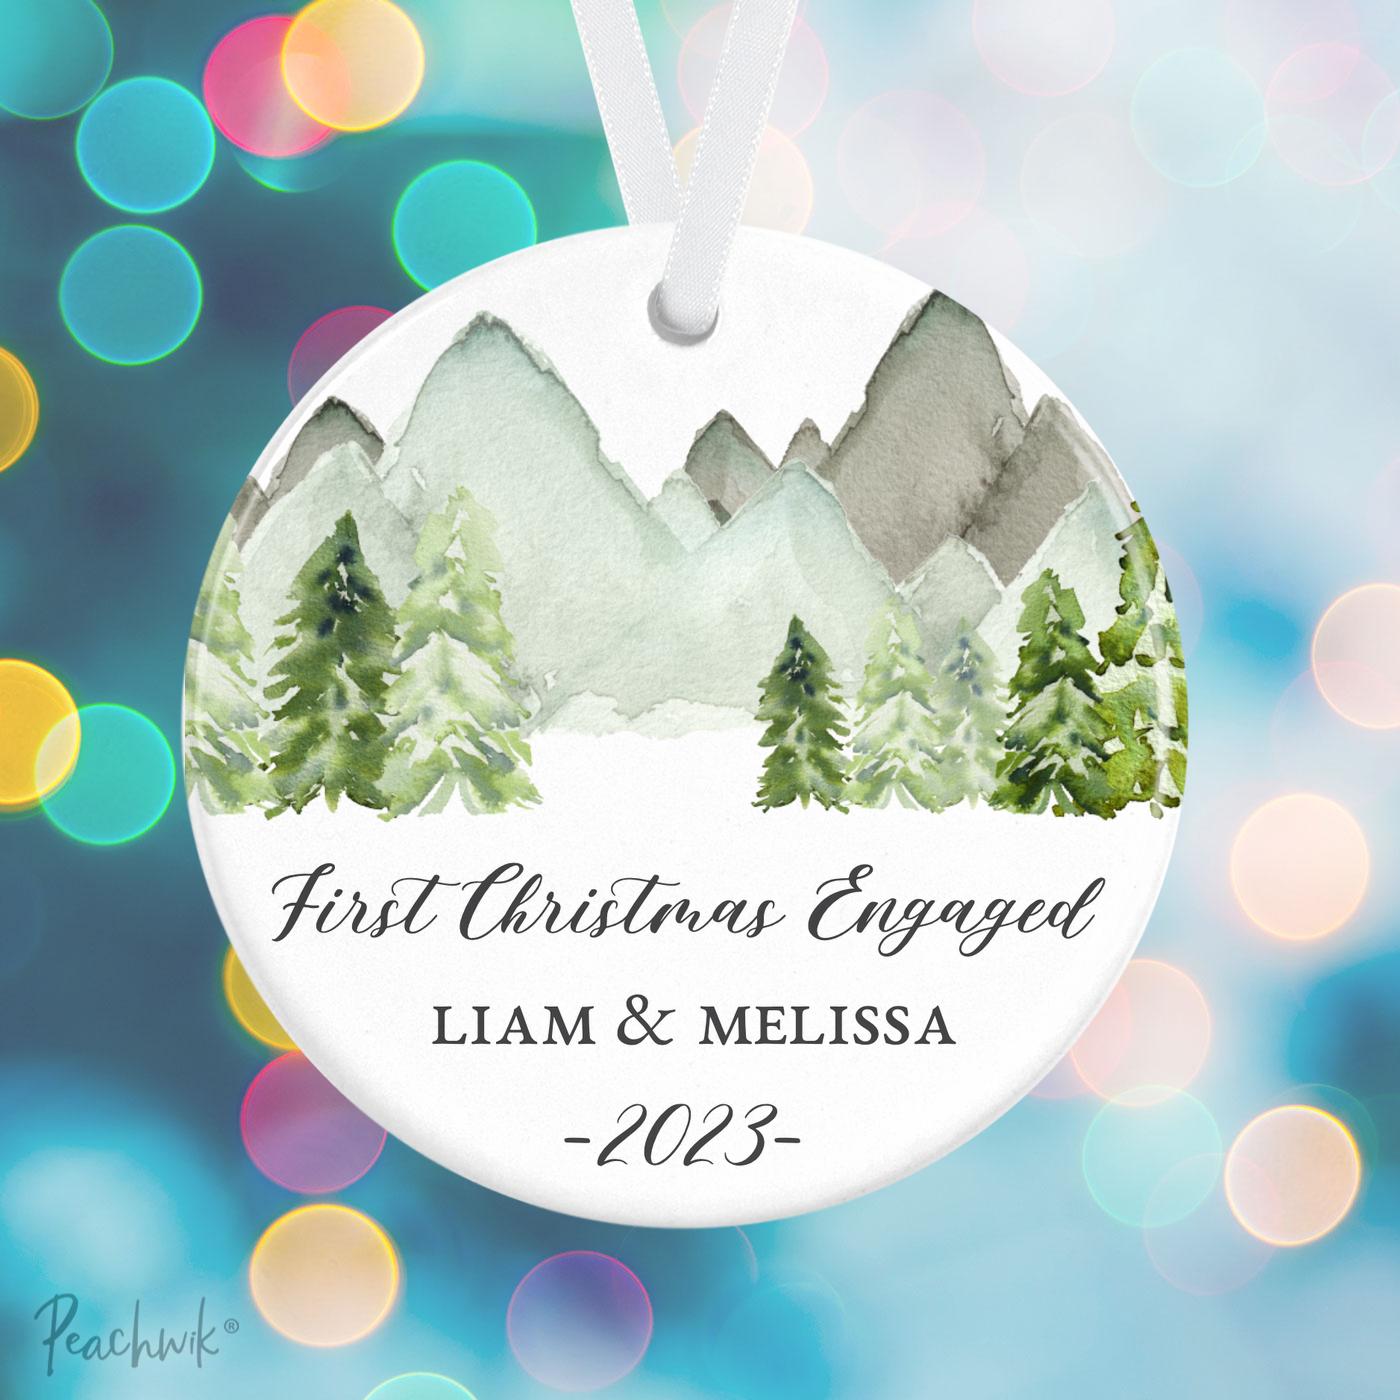 First Christmas Engaged Personalized Christmas Ornament